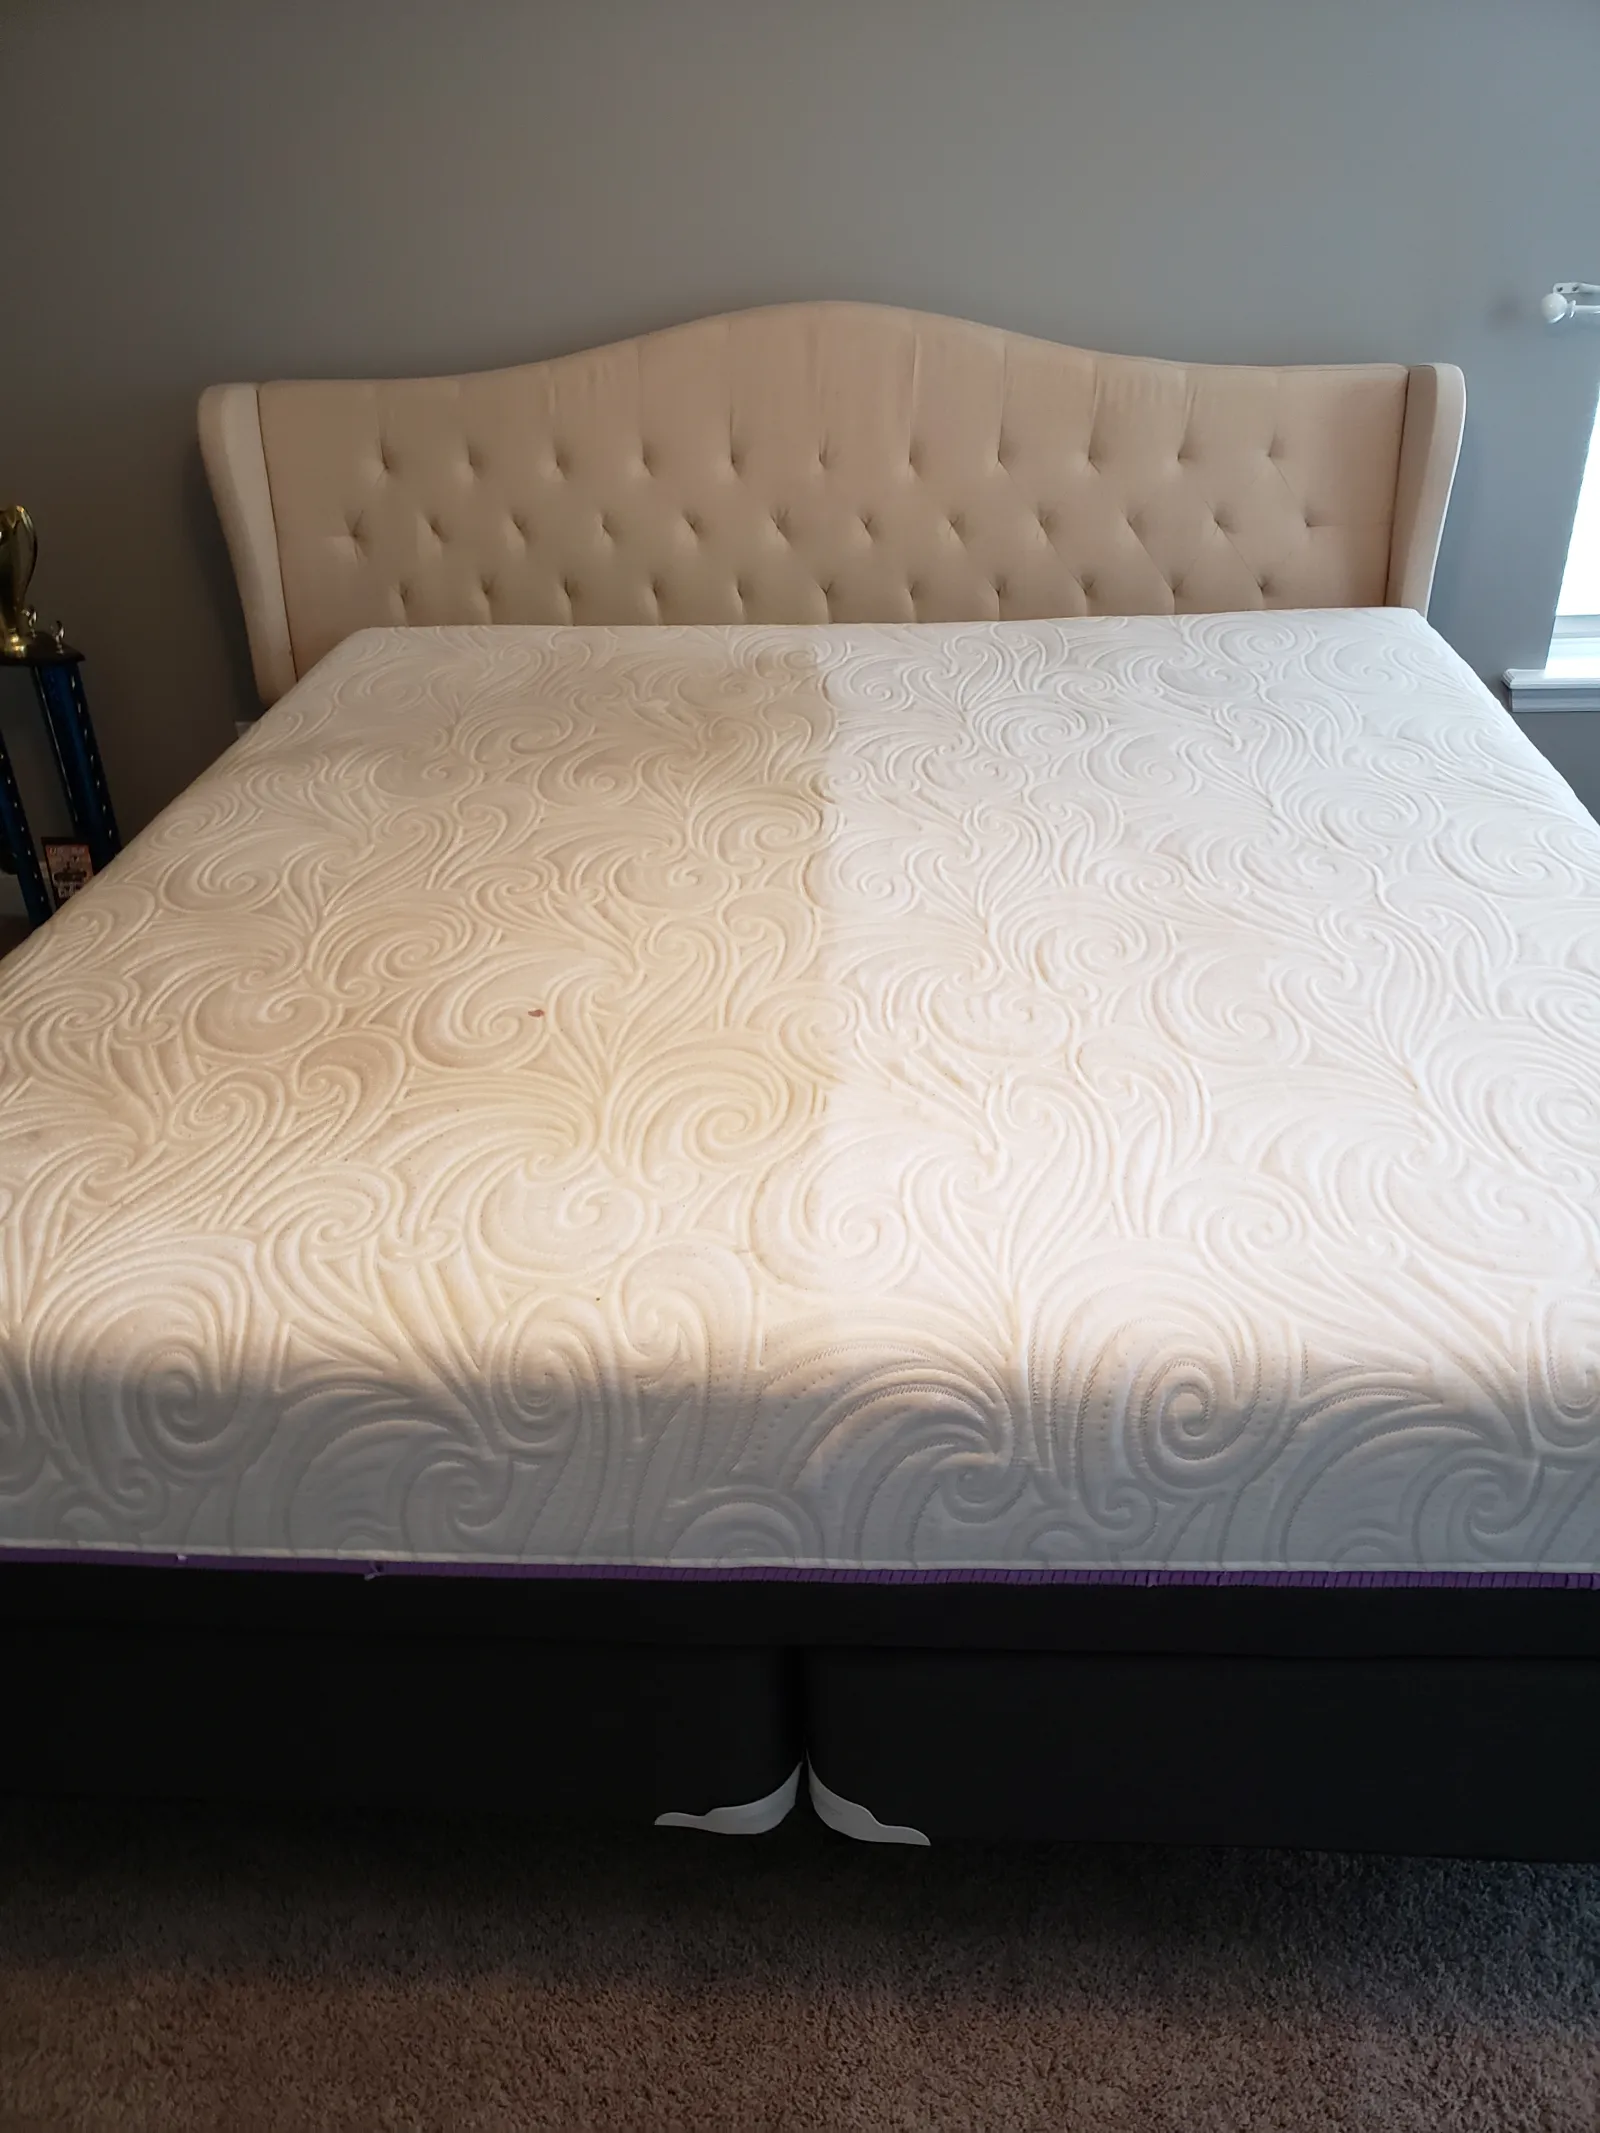 Mattress bed that is half dirty and half cleaned by Zerorez with steam cleaning